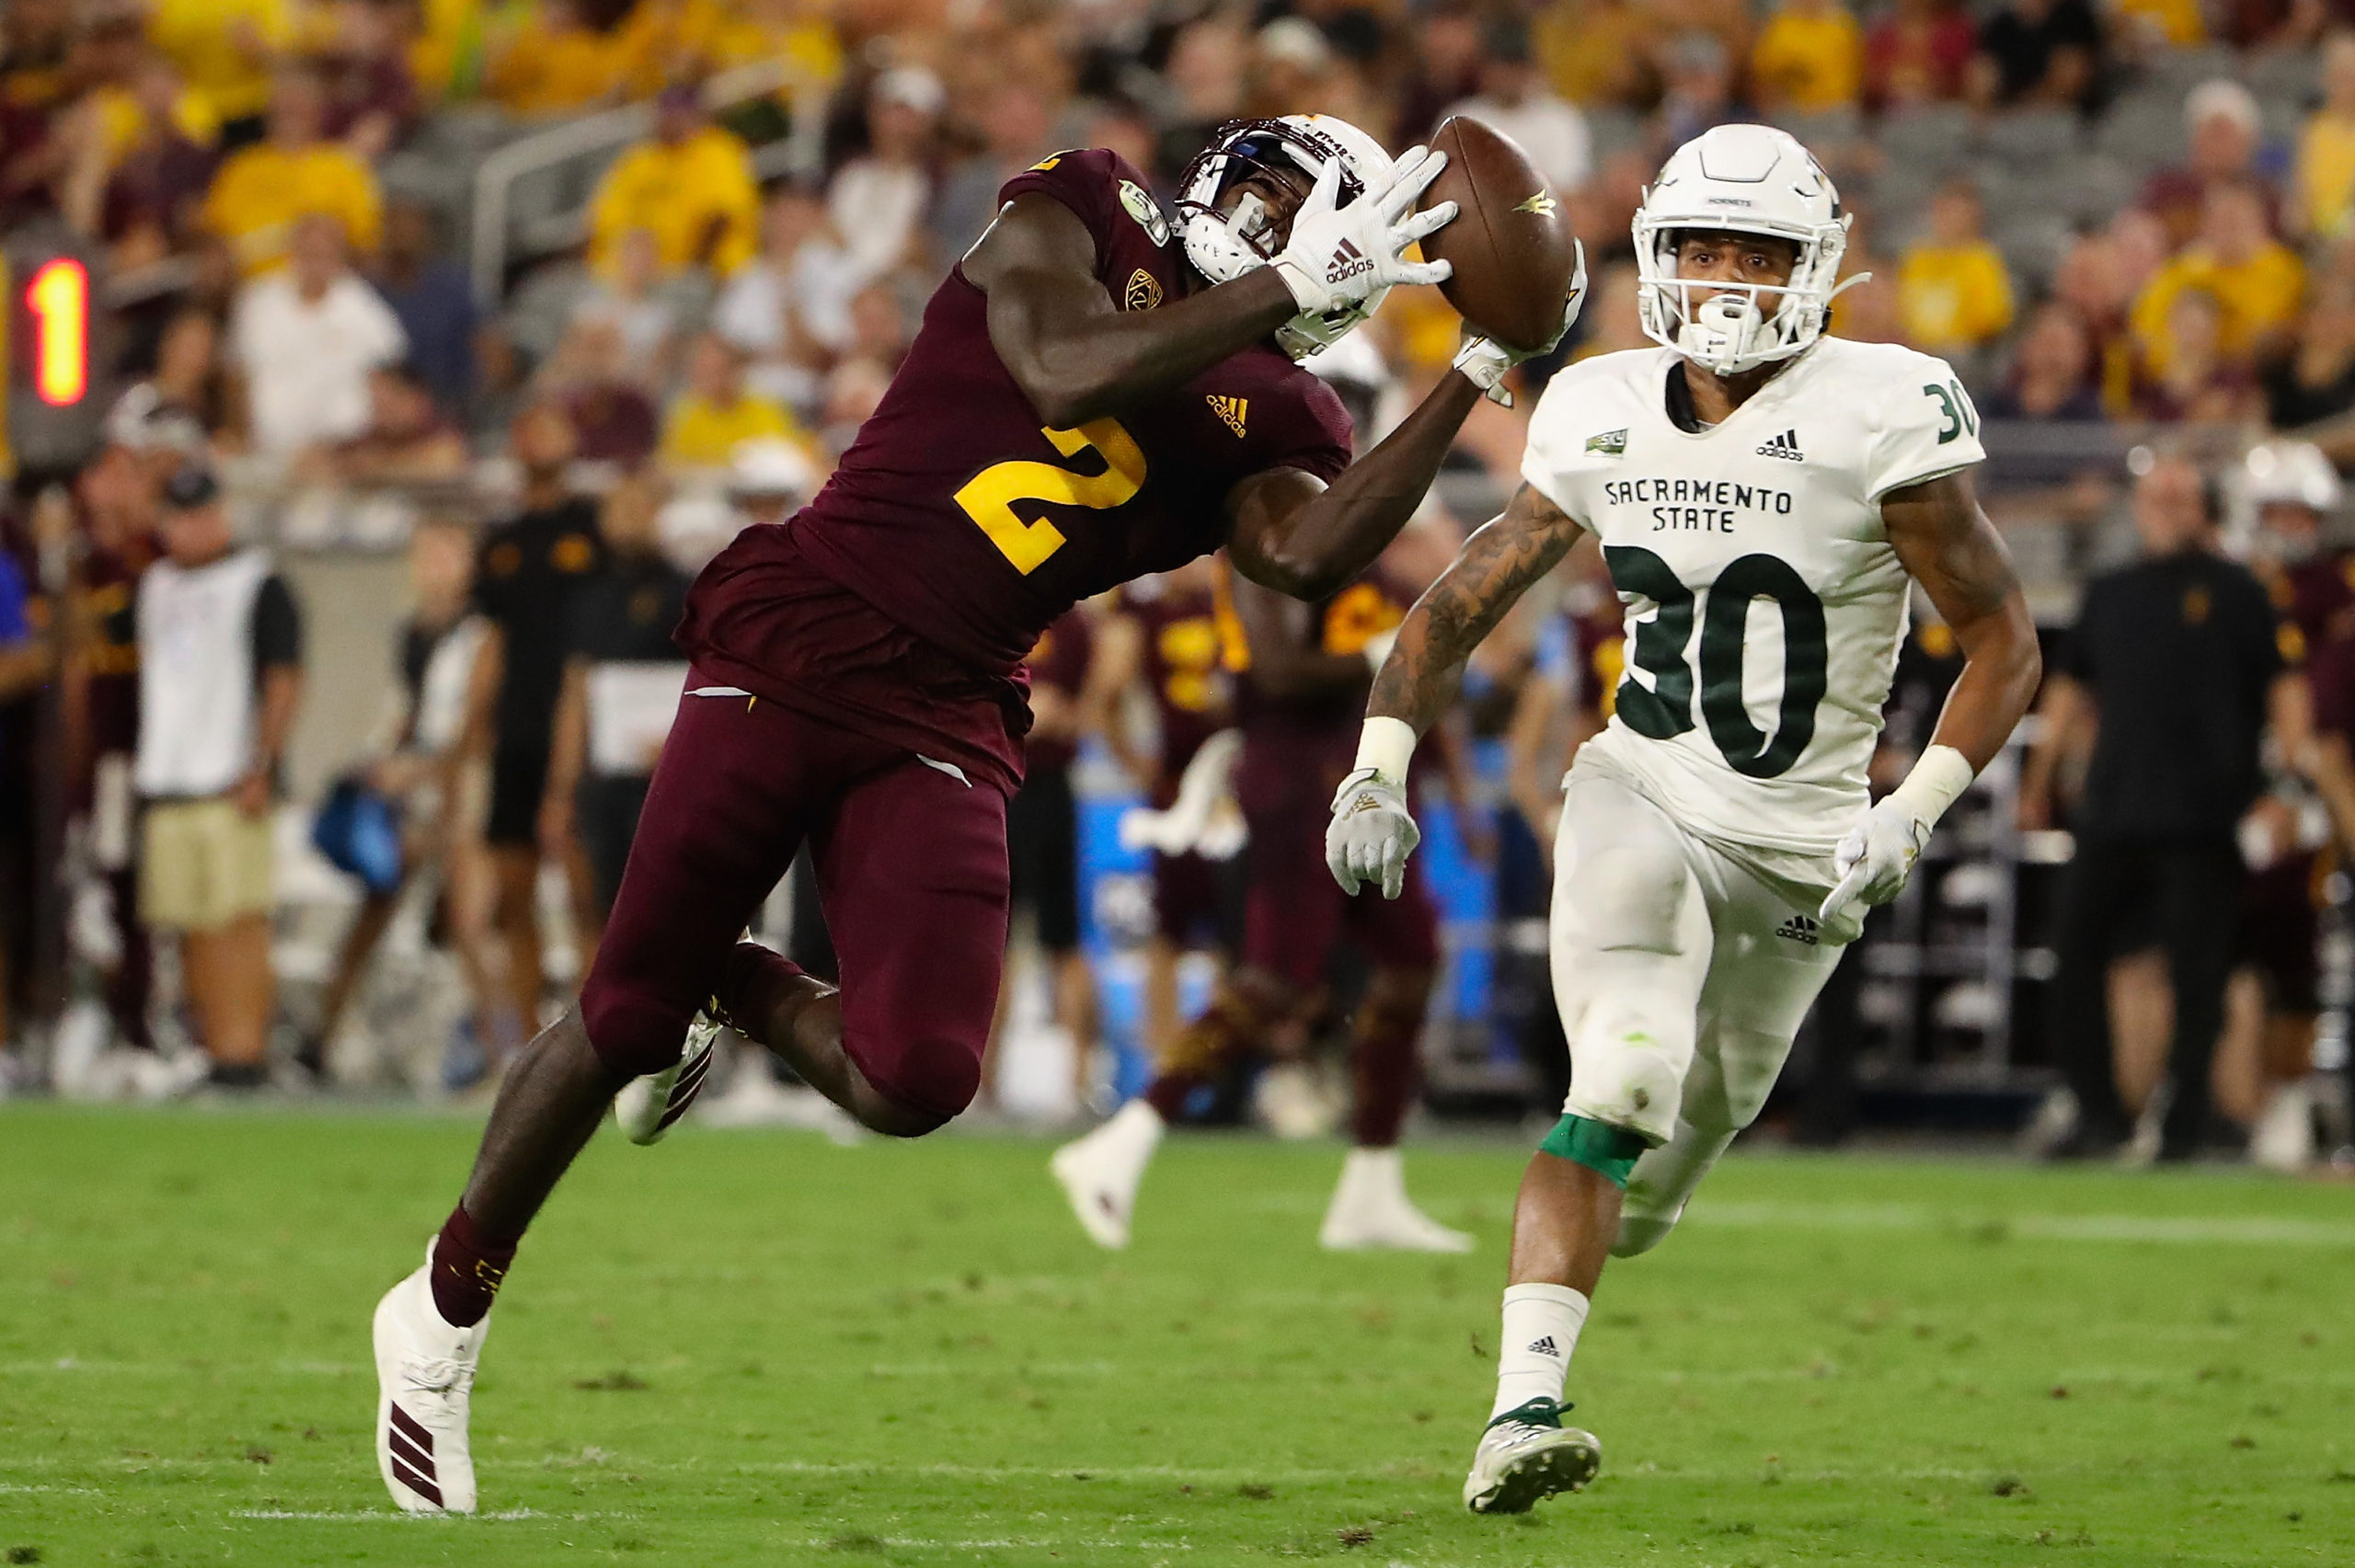 TEMPE, ARIZONA - SEPTEMBER 06: Wide receiver Brandon Aiyuk #2 of the Arizona State Sun Devils catches a 52 yard reception ahead of defensive back Allen Perryman #30 of the Sacramento State Hornets during the second half of the NCAAF game at Sun Devil Stadium on September 06, 2019 in Tempe, Arizona. Christian Petersen/Getty Images